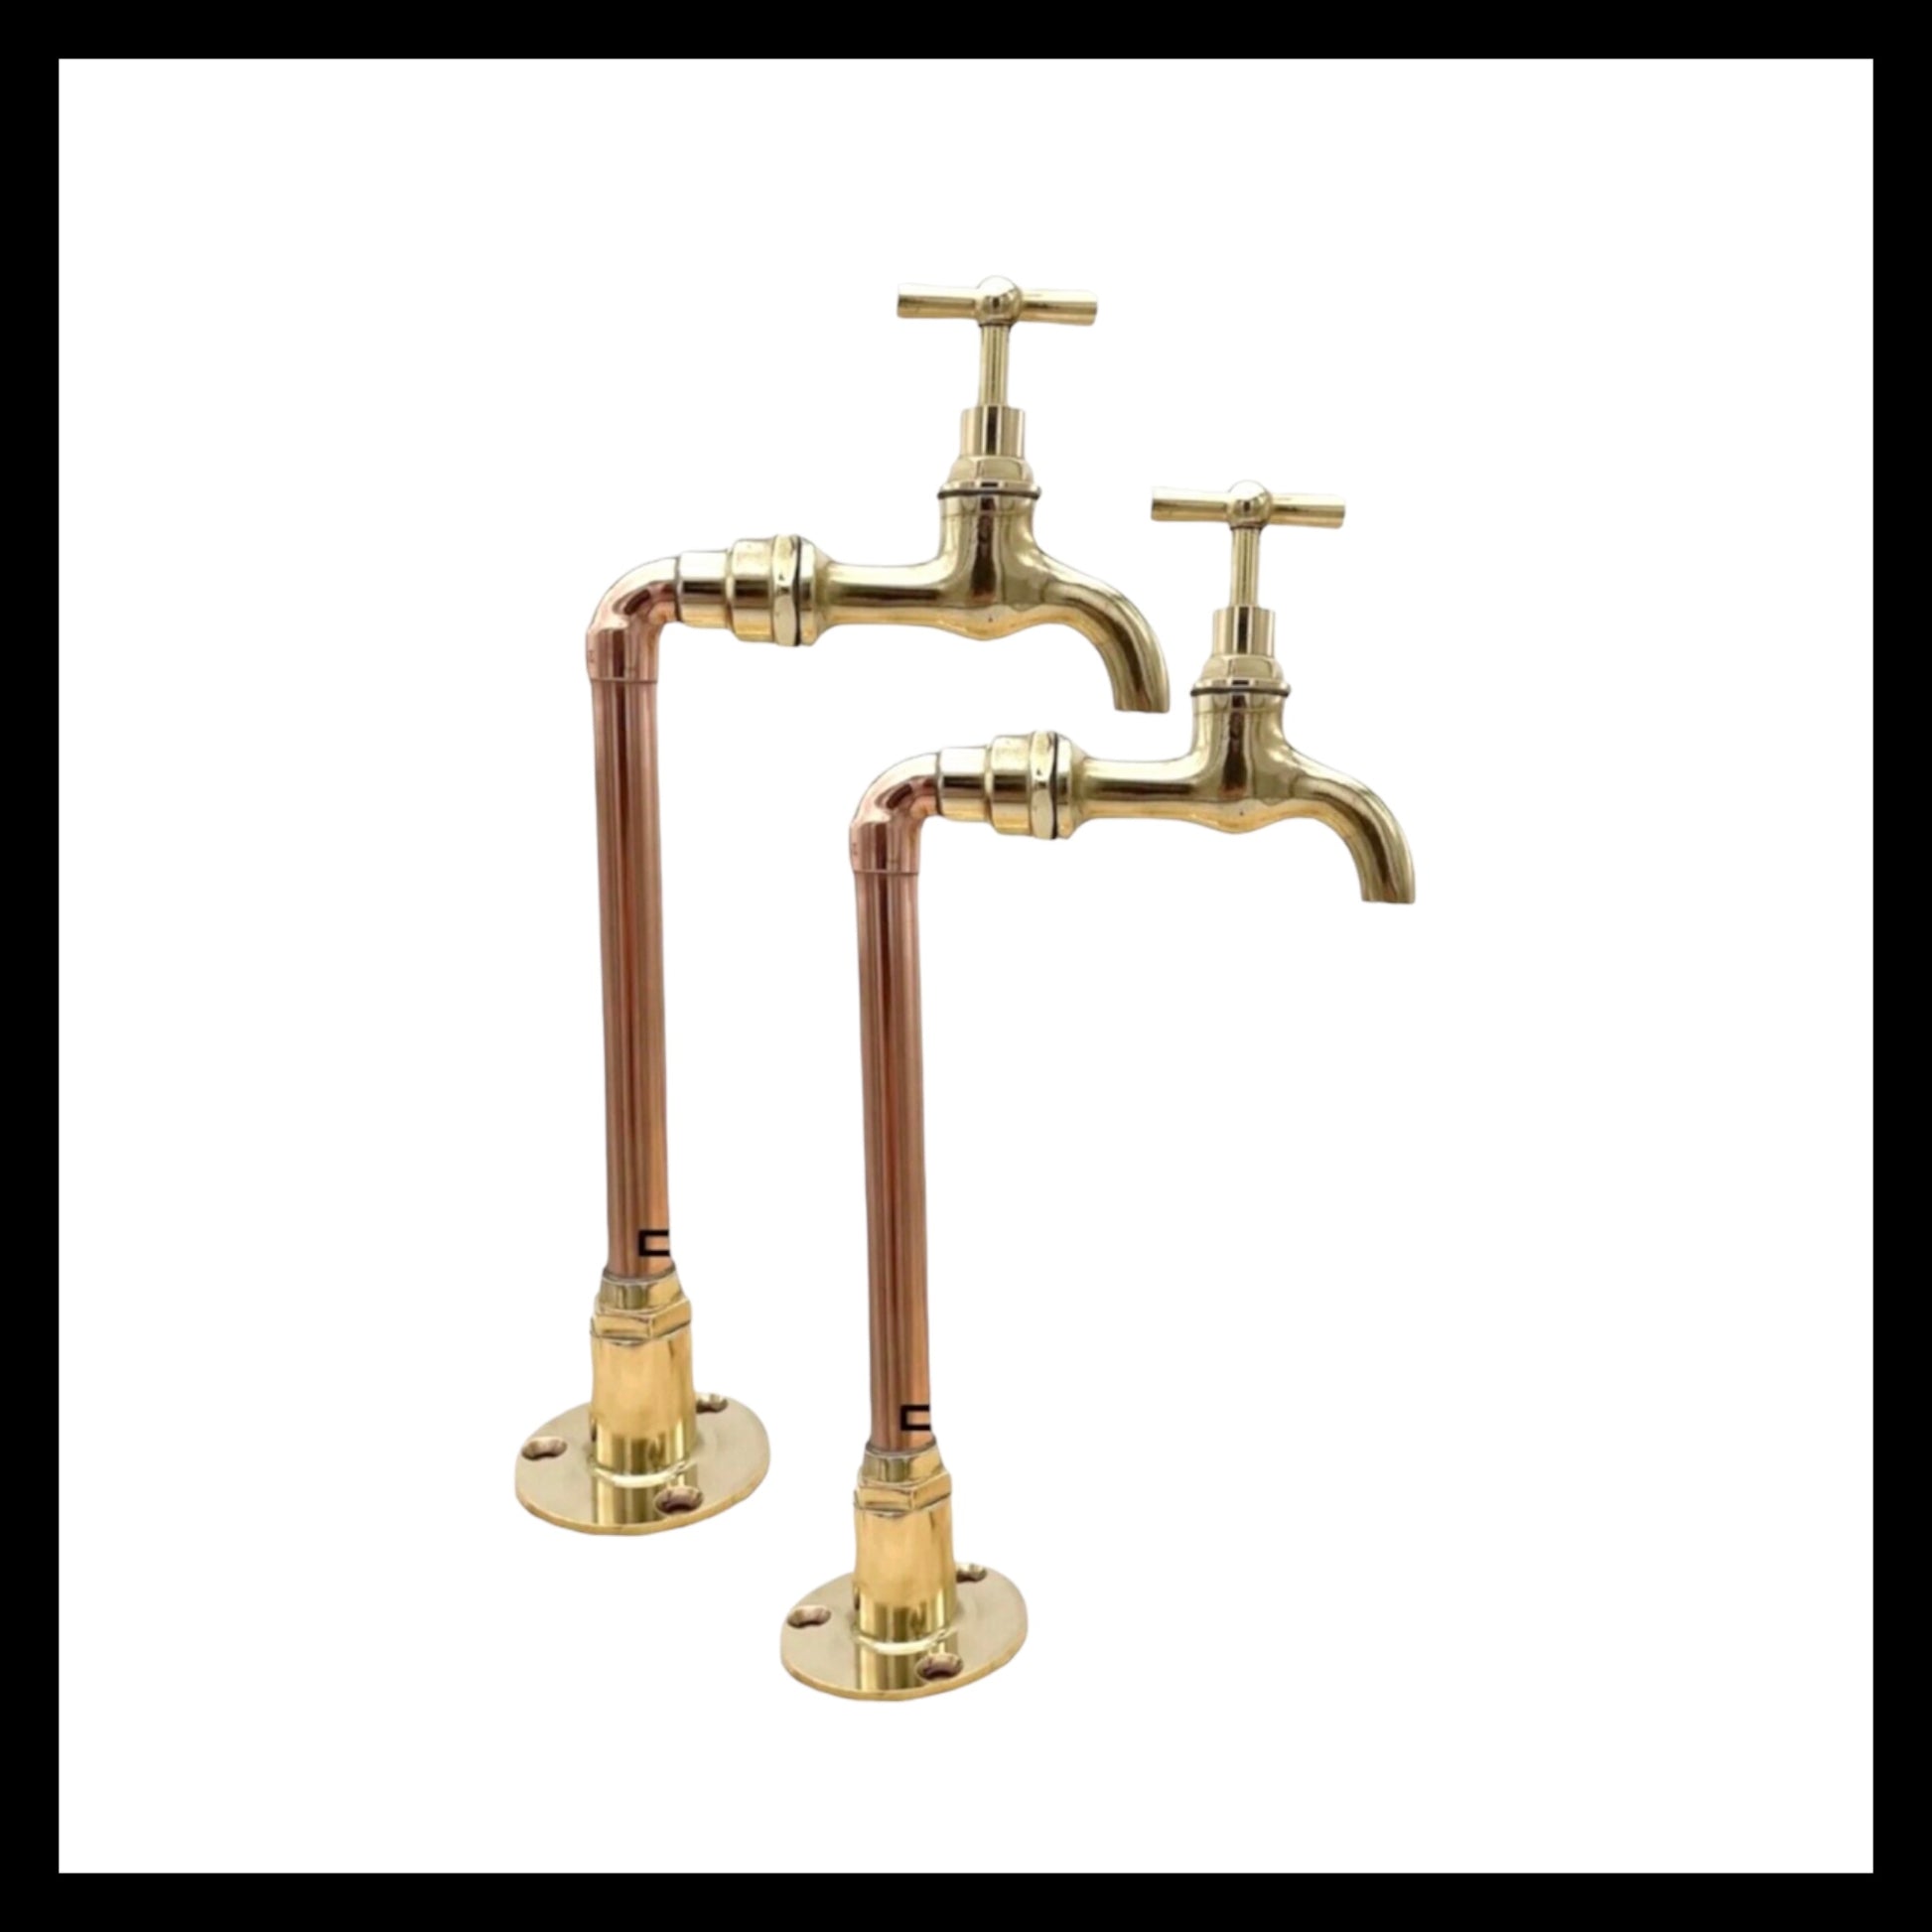 image pair copper and brass kitchen taps sold by All Things French Store